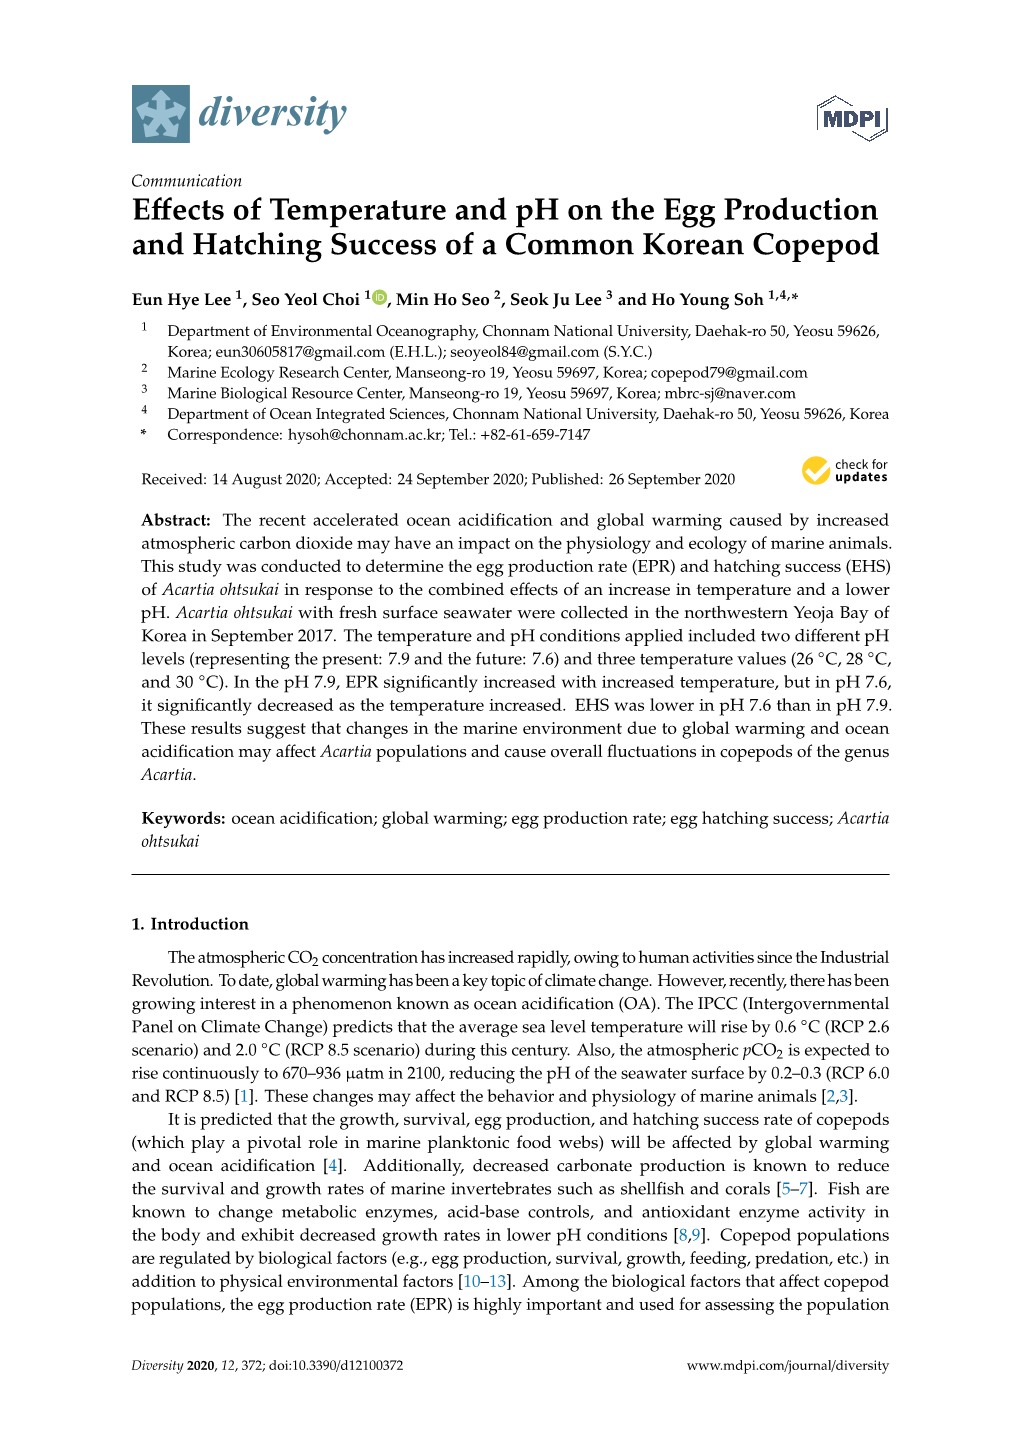 Effects of Temperature and Ph on the Egg Production and Hatching